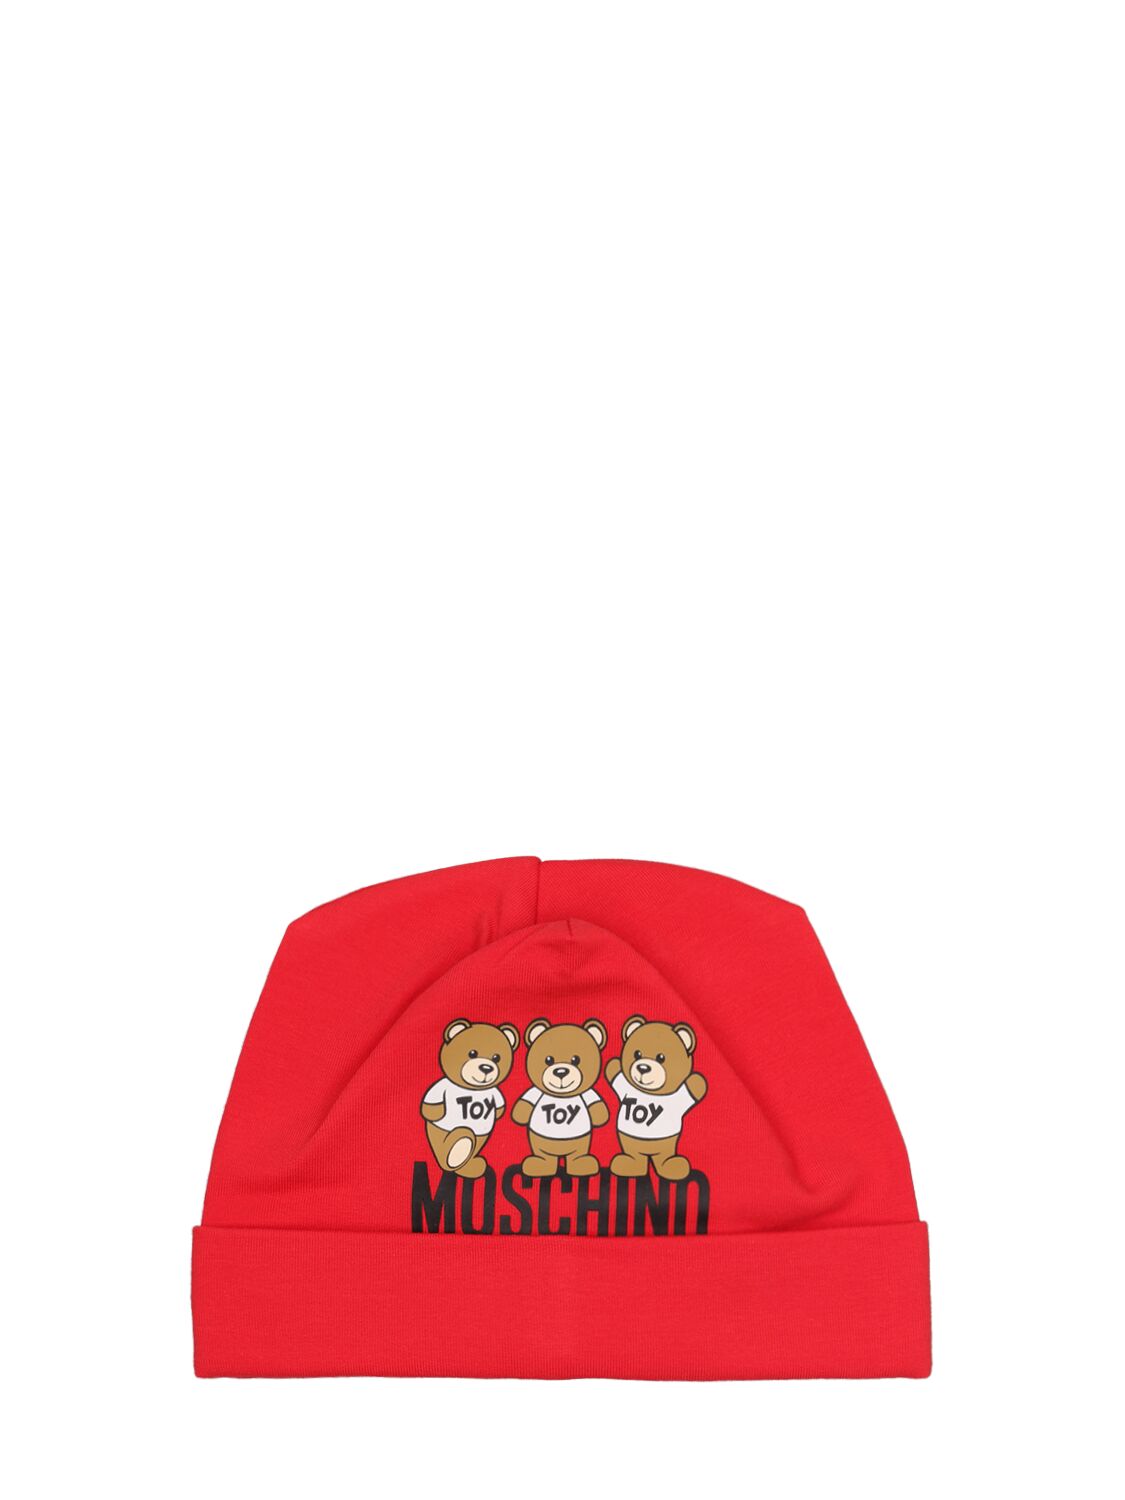 Moschino Kids' Printed Cotton Beanie In Red